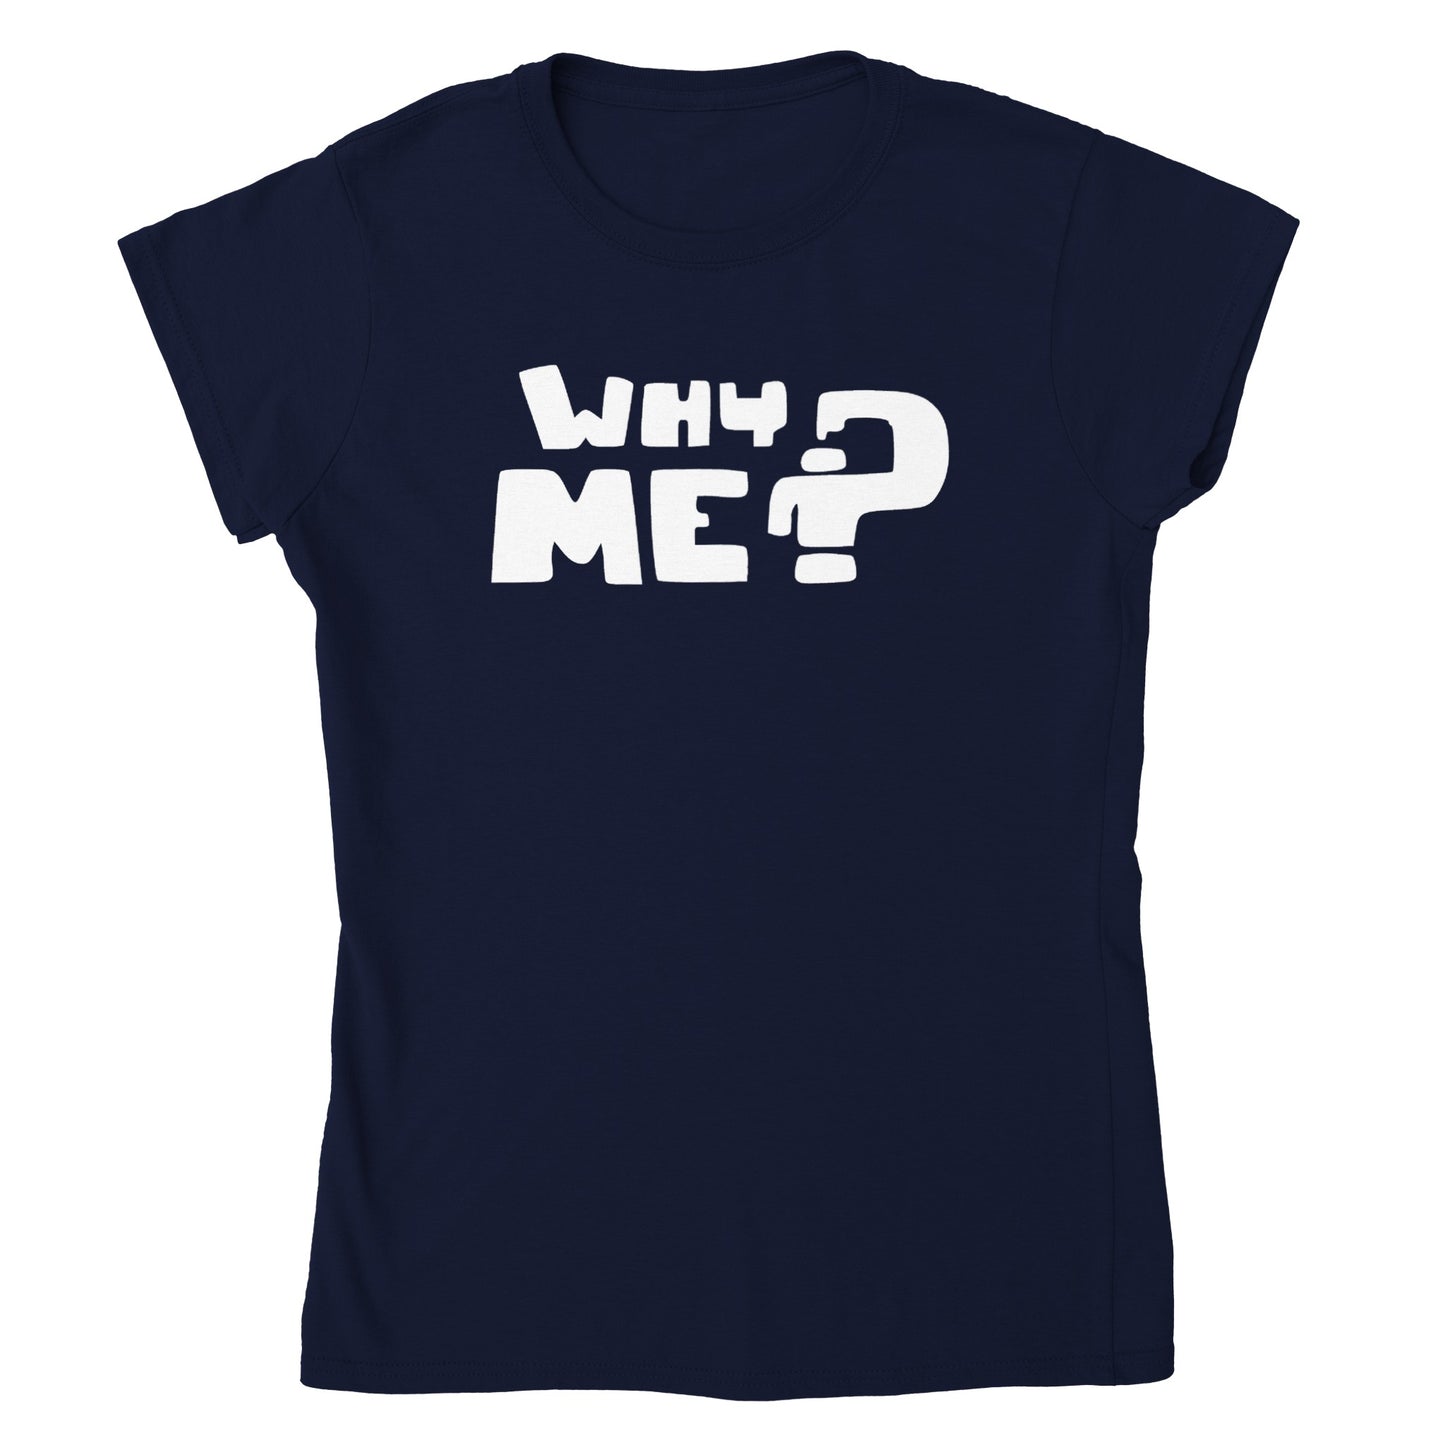 Why Me? - Classic Womens Crewneck T-shirt - Mister Snarky's